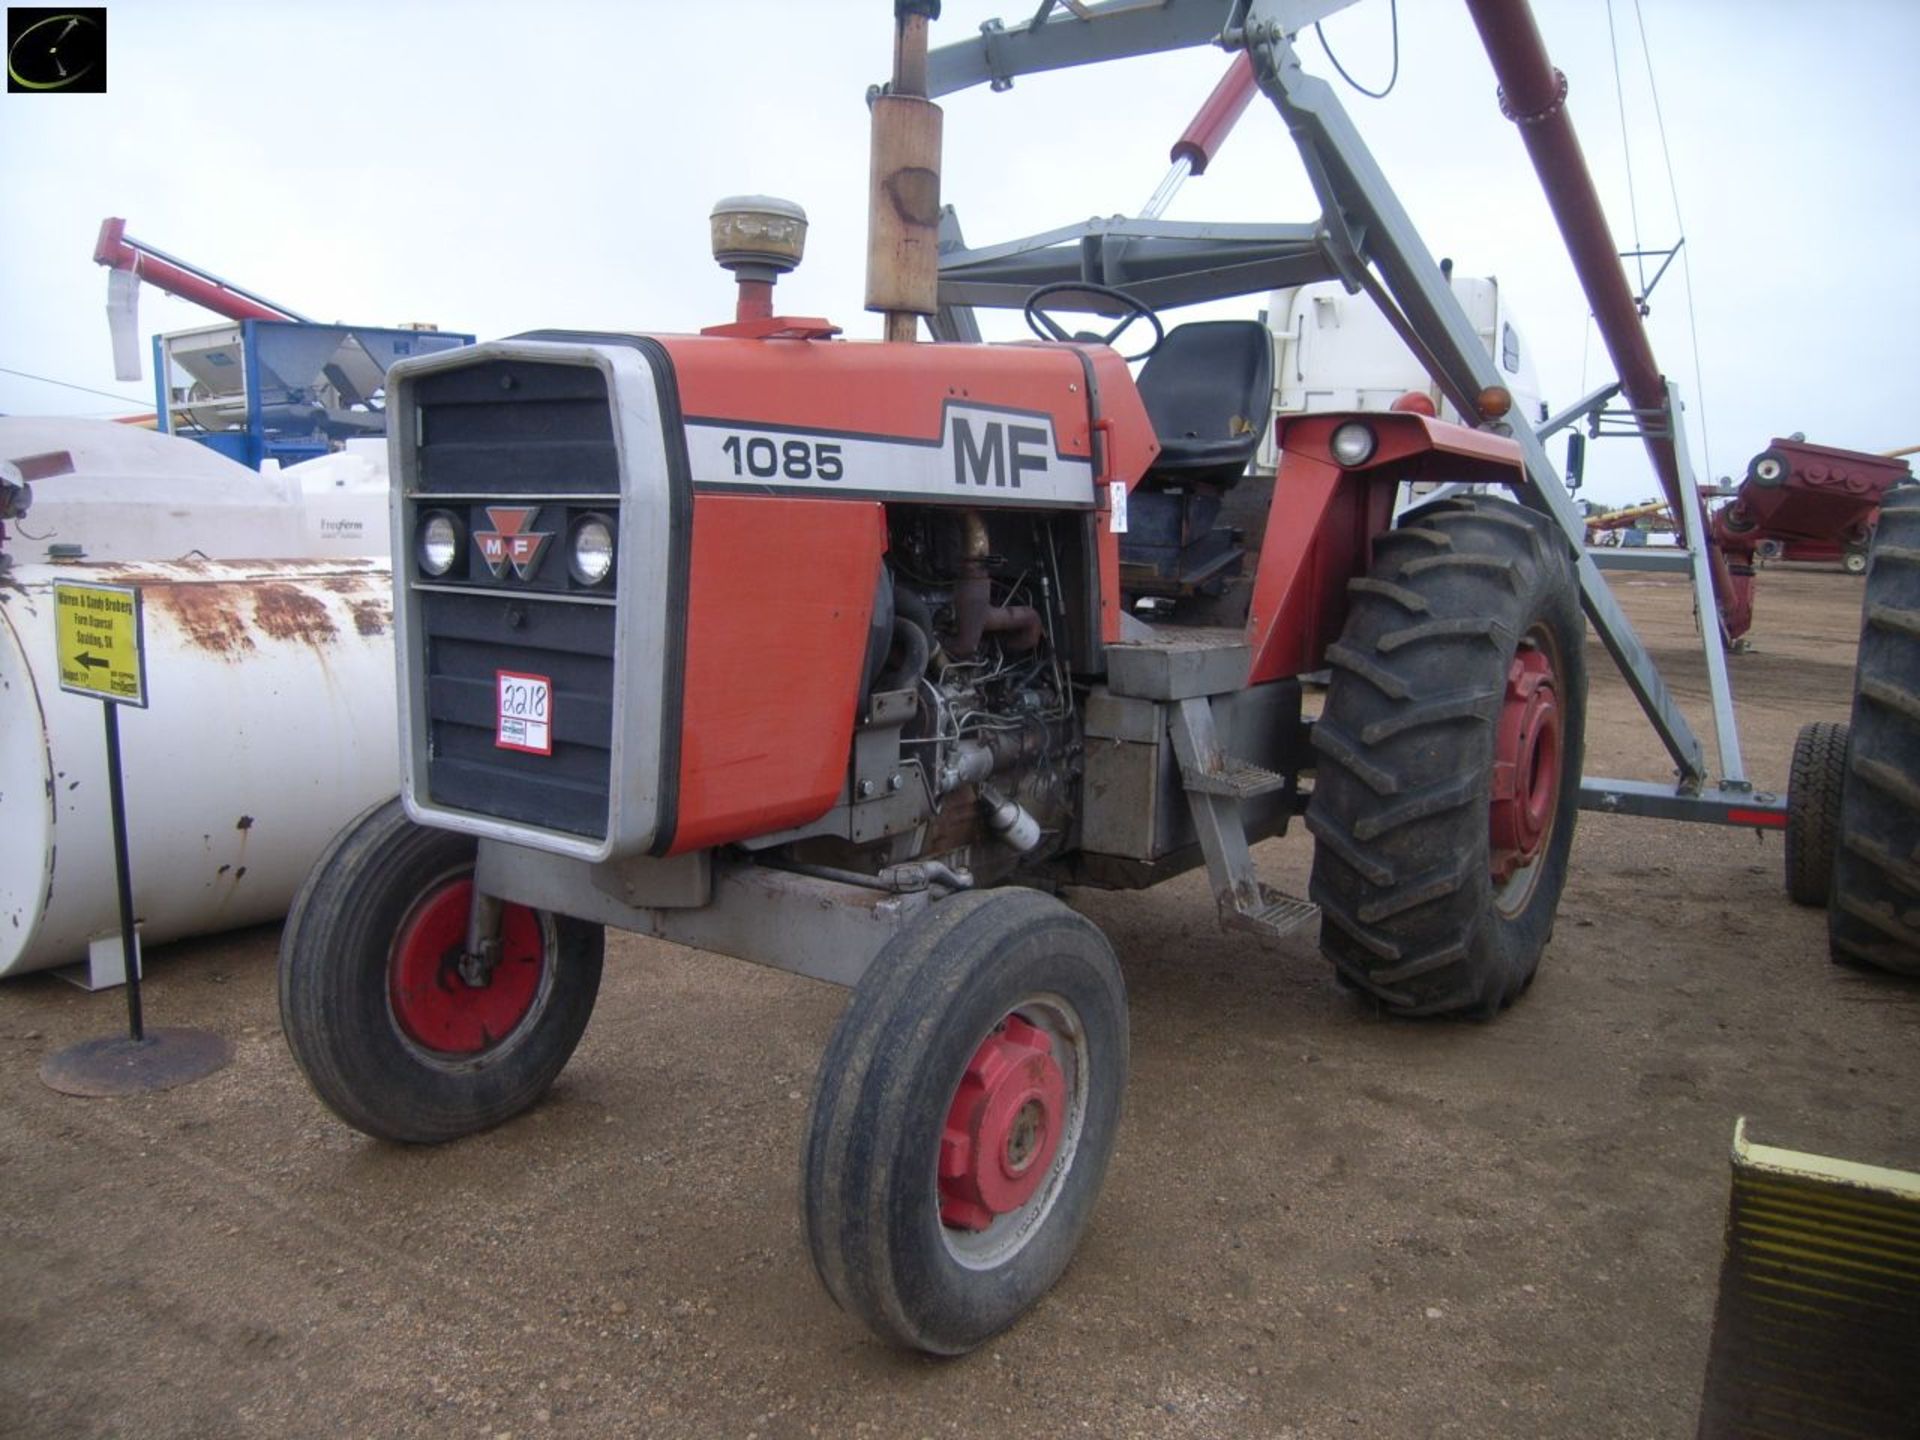 1976 MF 1085 TRACTOR, 2WD, ODO SHOWING 8650 HRS, 4 CYL ENG, 3 SPD TRANS W/ LOW & MULTI POWER, 2